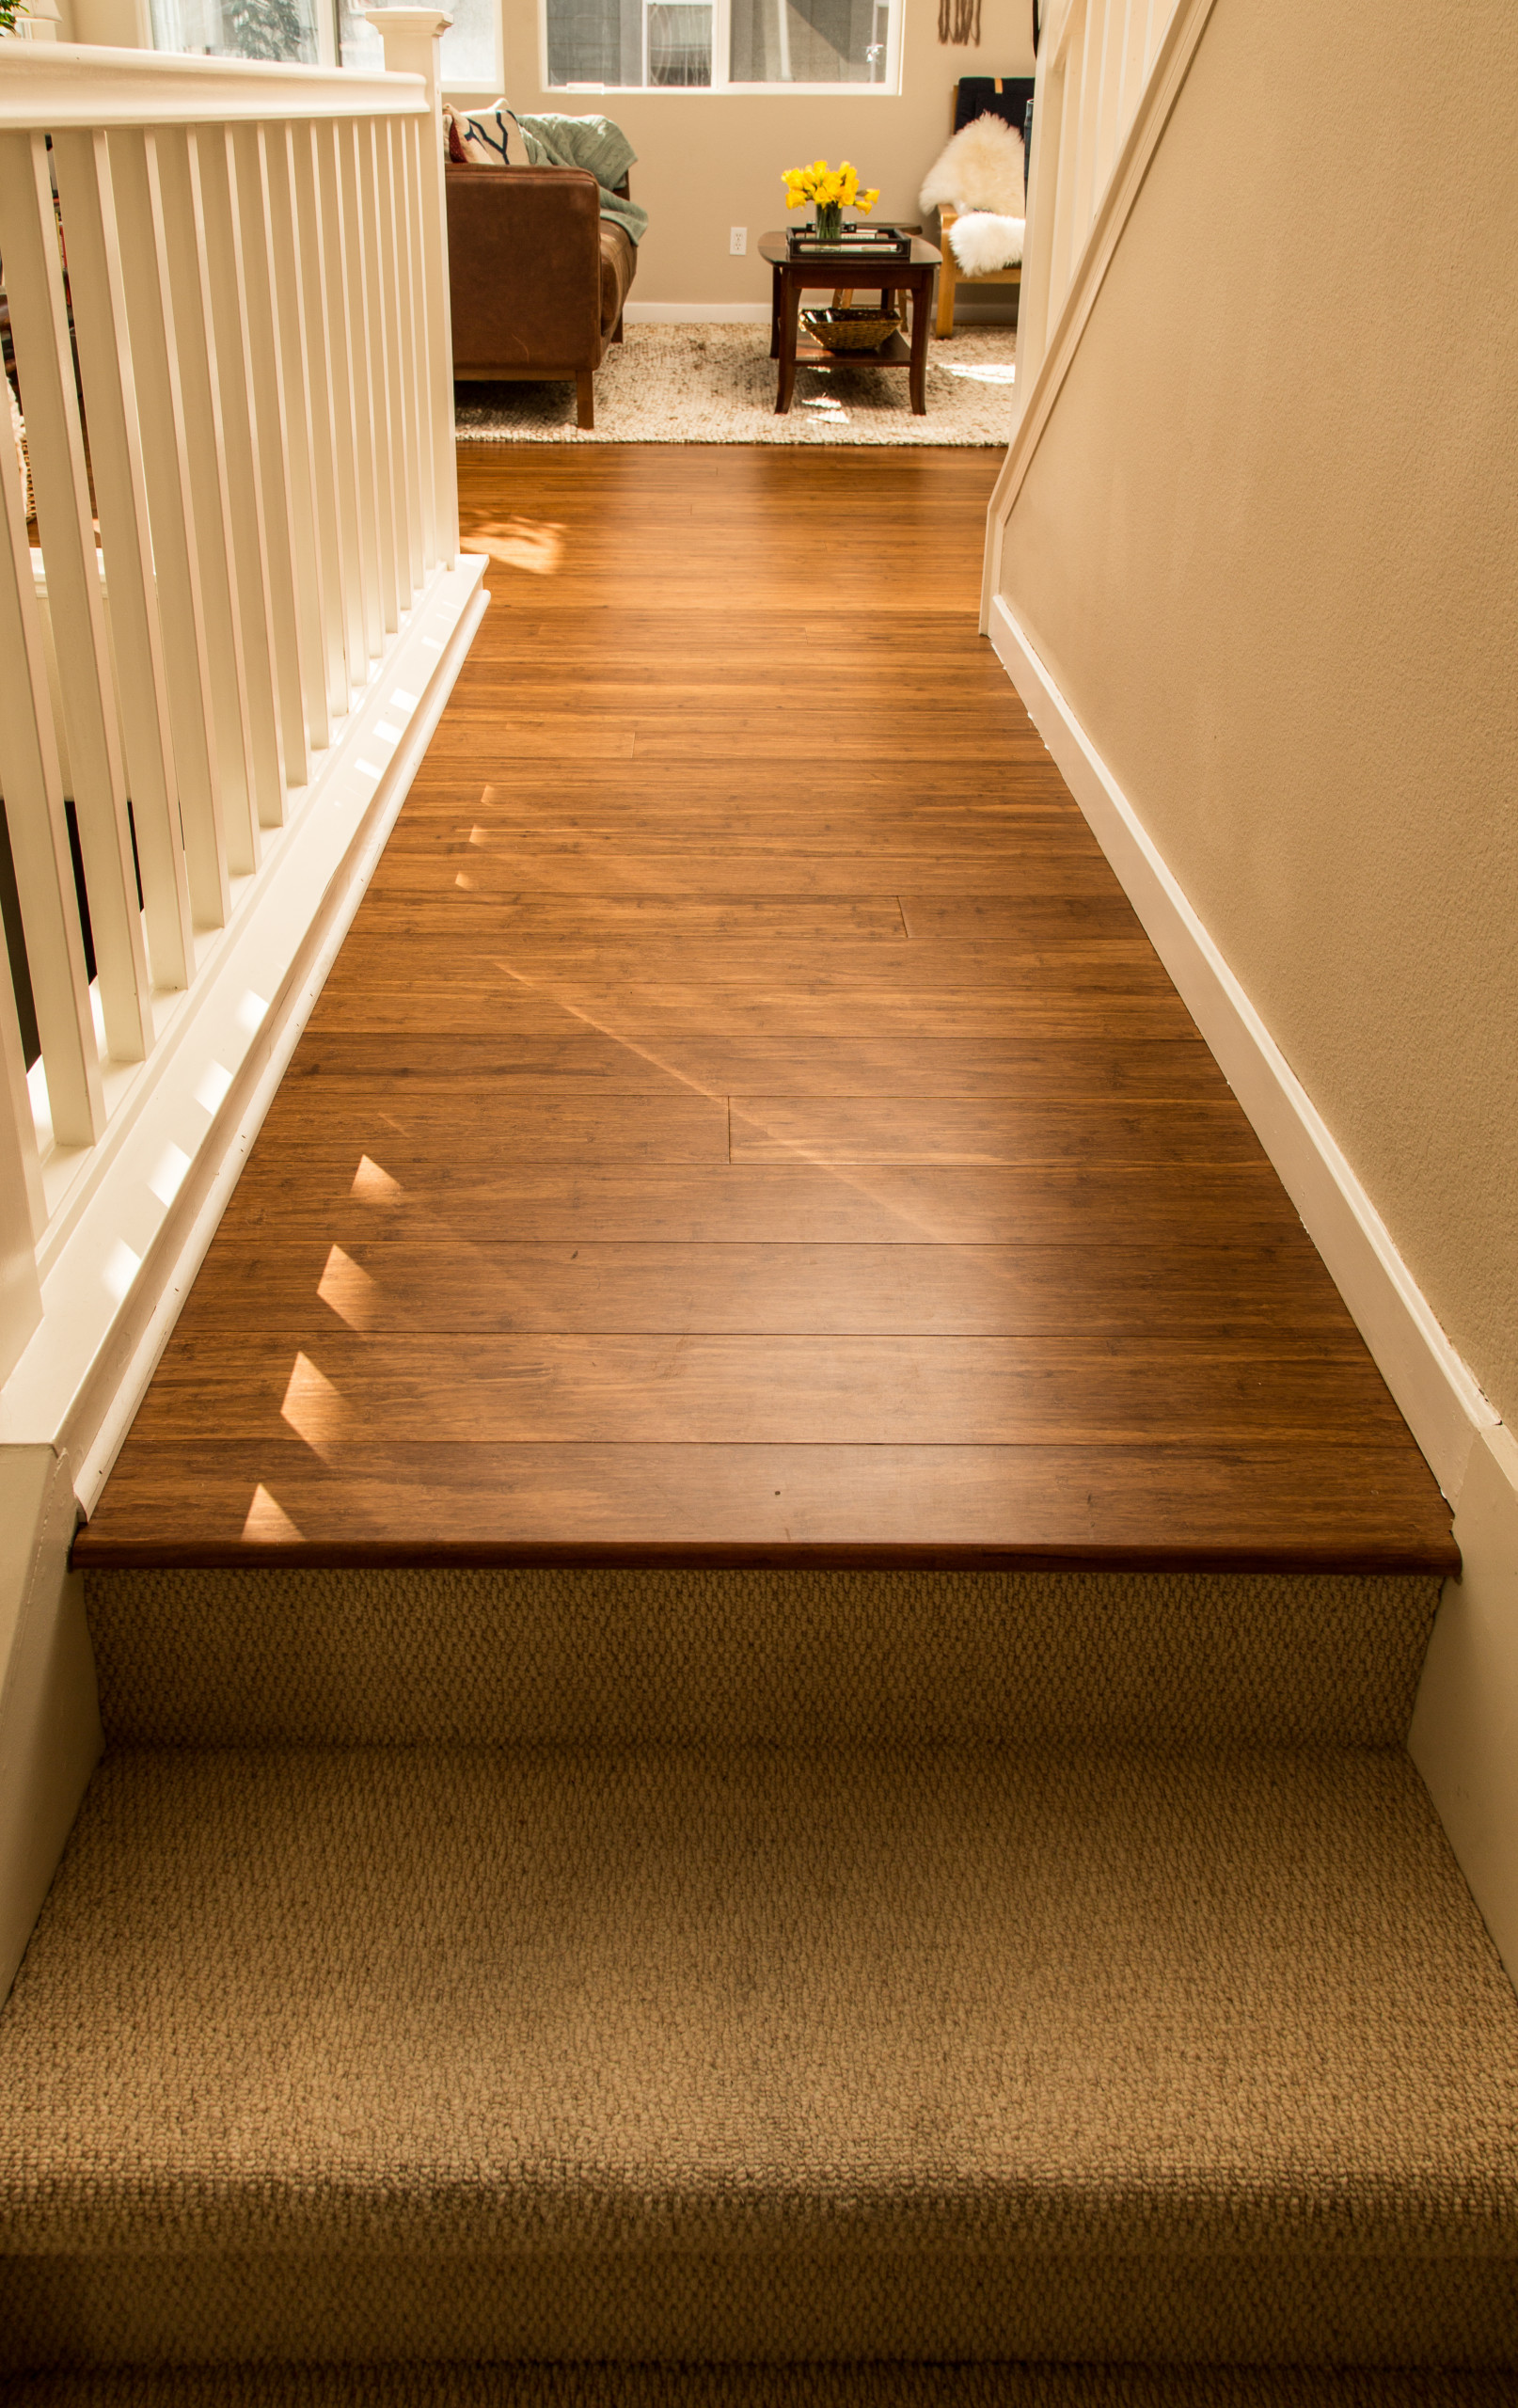 Bamboo Flooring Carpeted Stairs San, Hardwood Floors With Carpeted Stairs